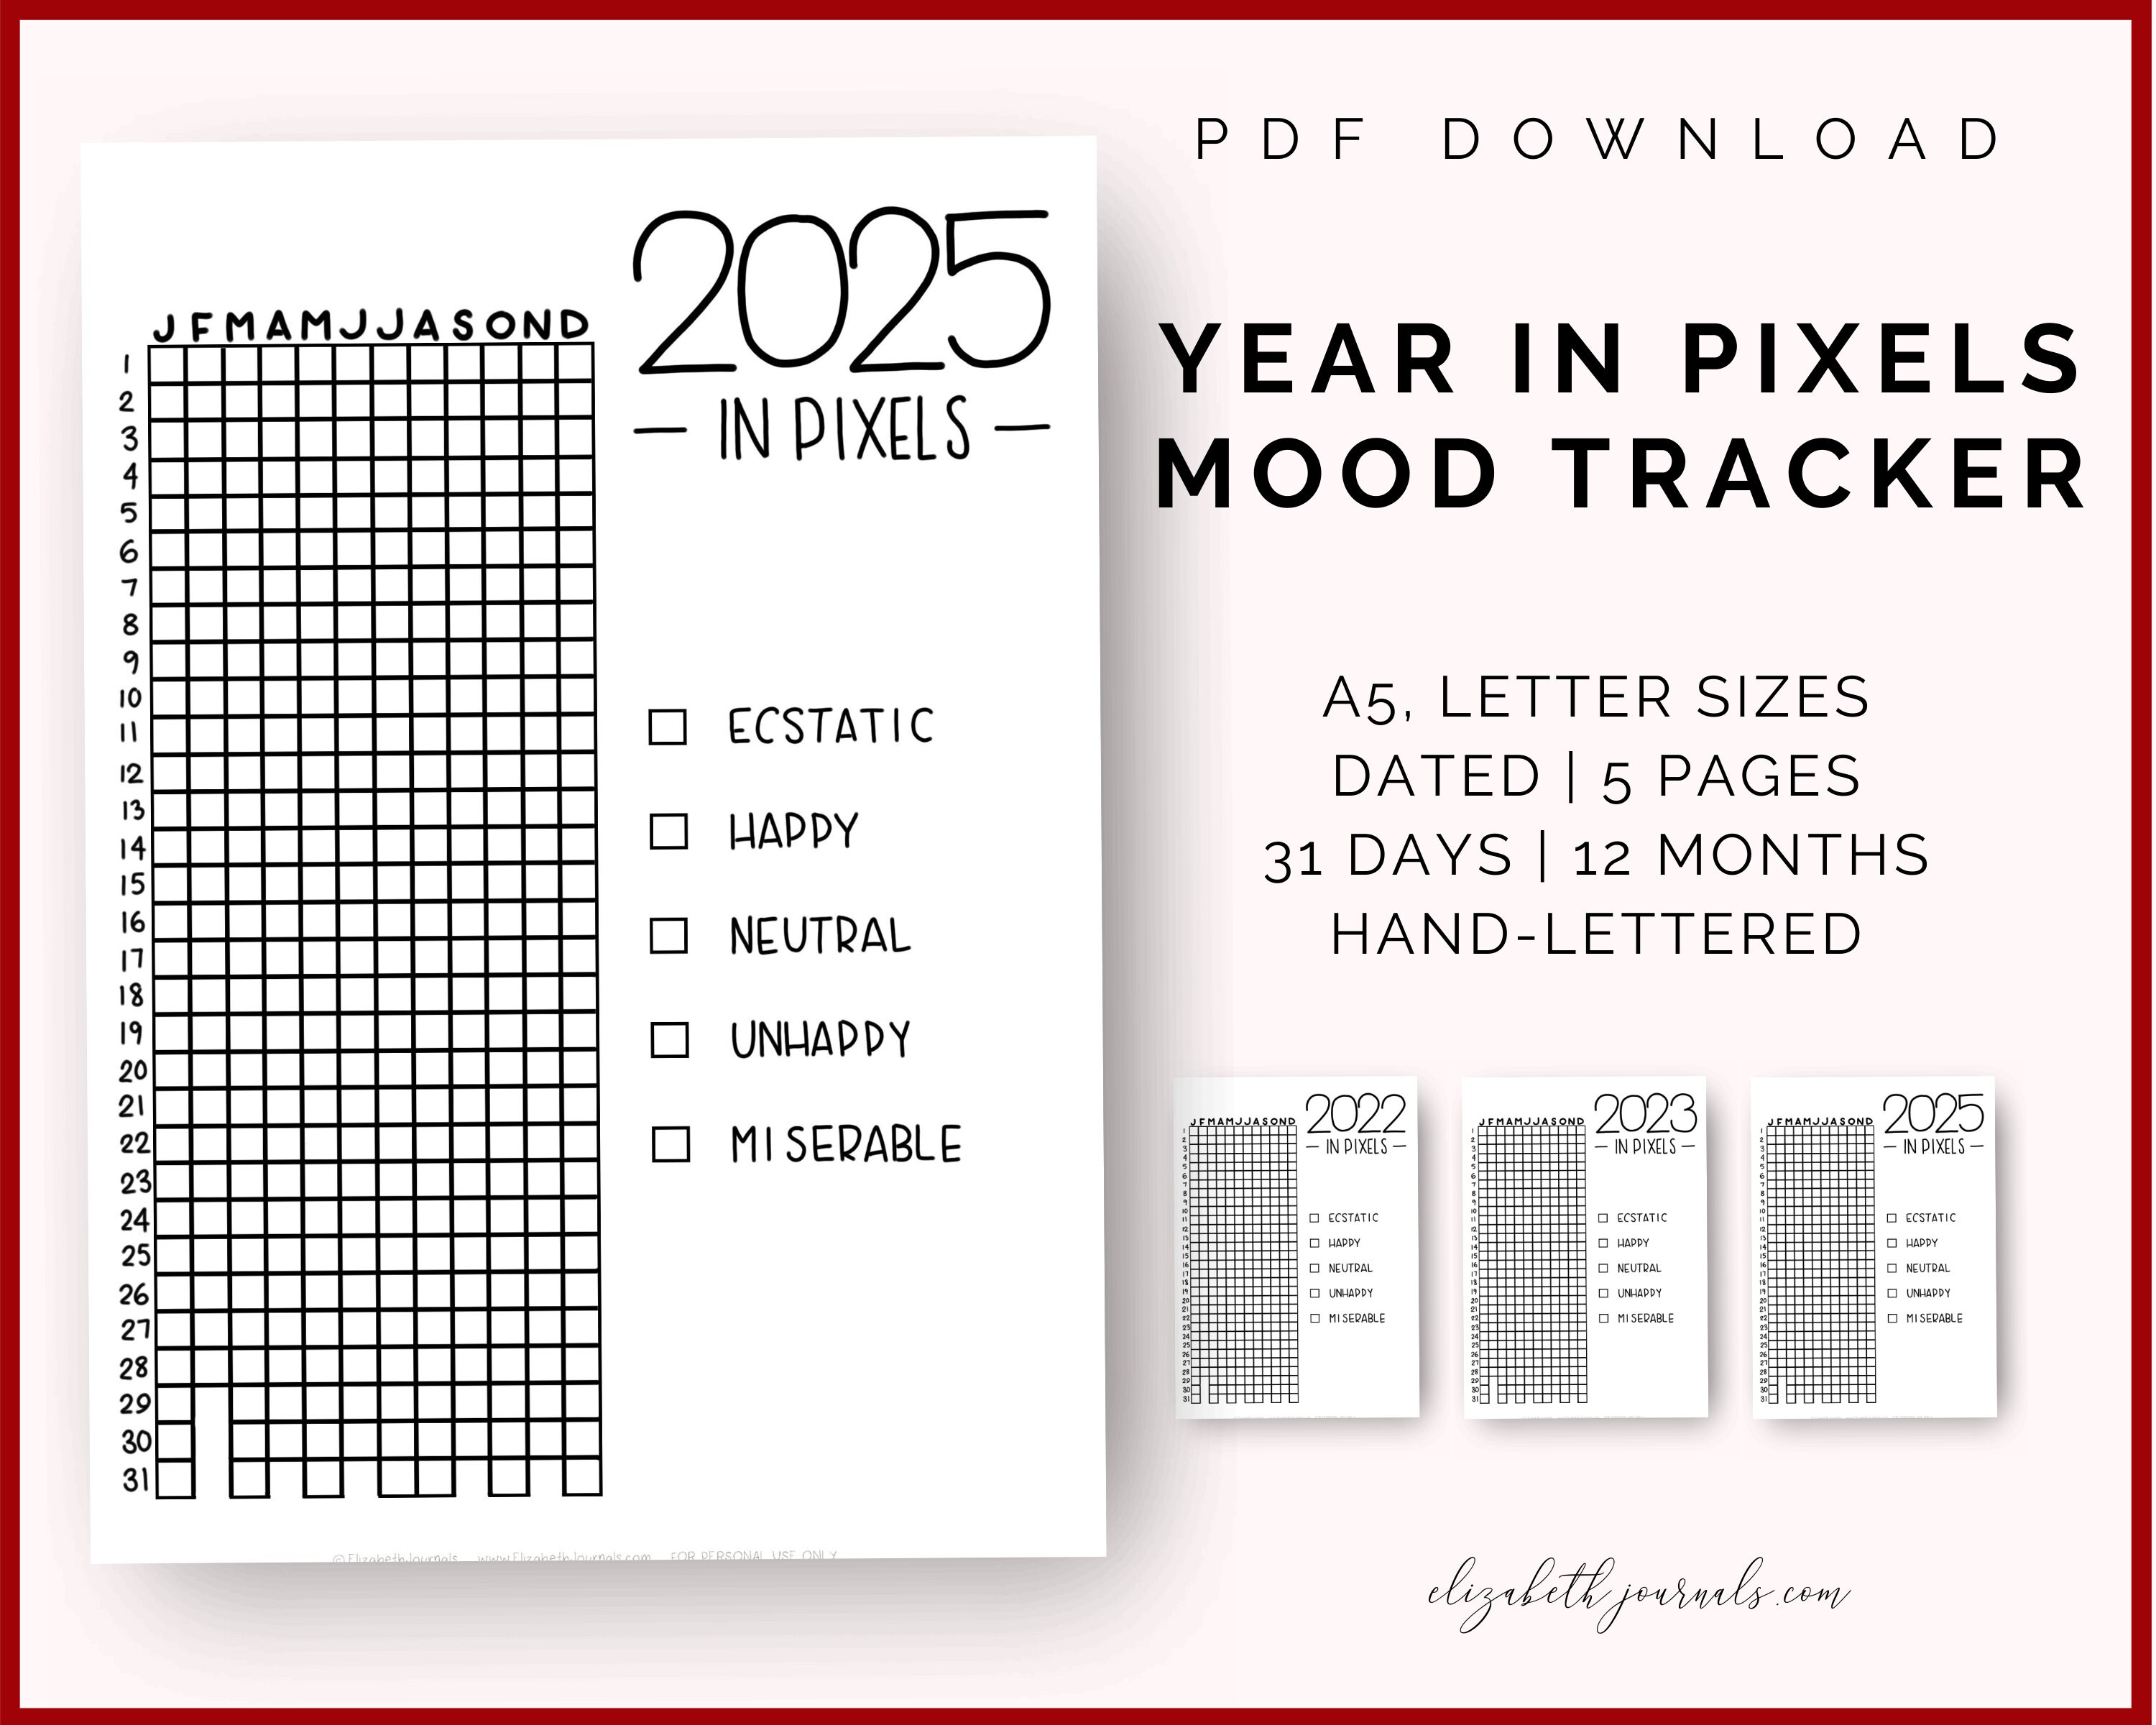 Letter Sizes 2022 & 2023 A4 Bullet Journal Template A Year in Pixels 2021 Bujo Insert Mood Tracker Printable Yearly Mood Chart A5